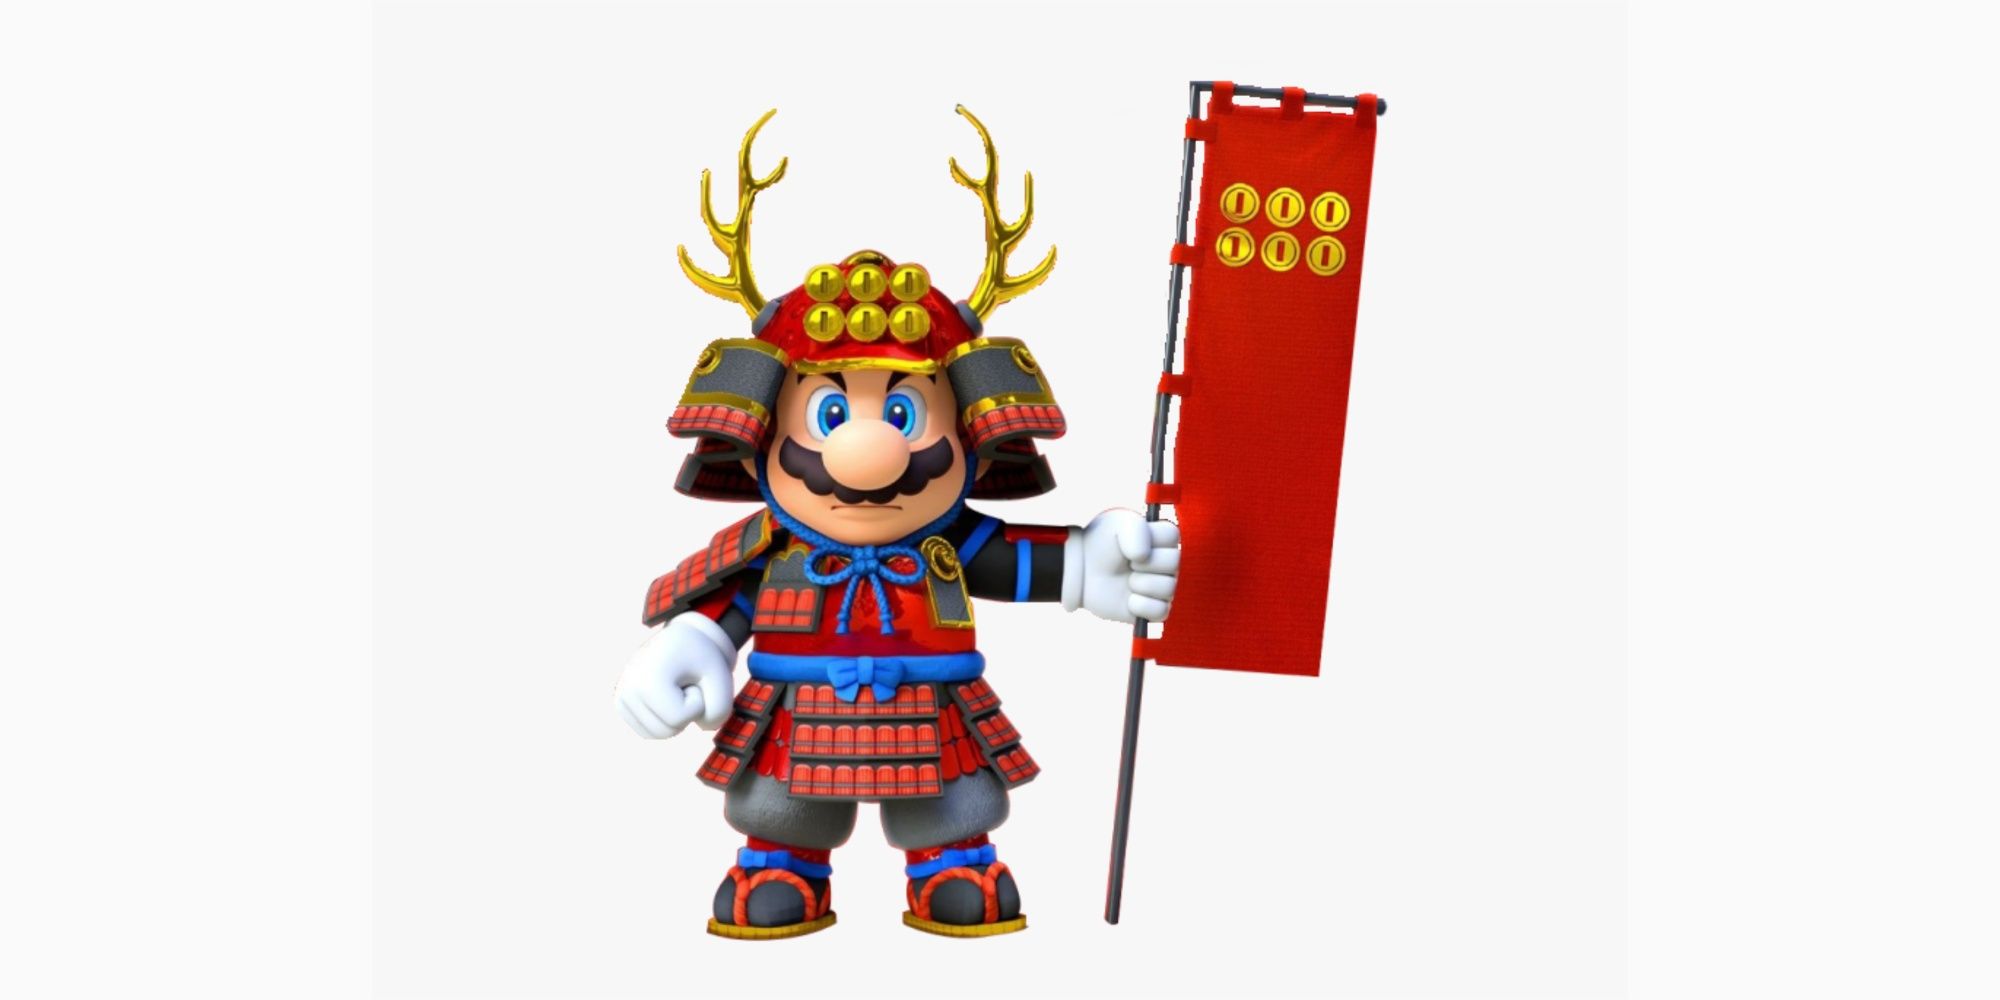 Samuria Mario as featured in Super Mario Odyssey and other Mario games